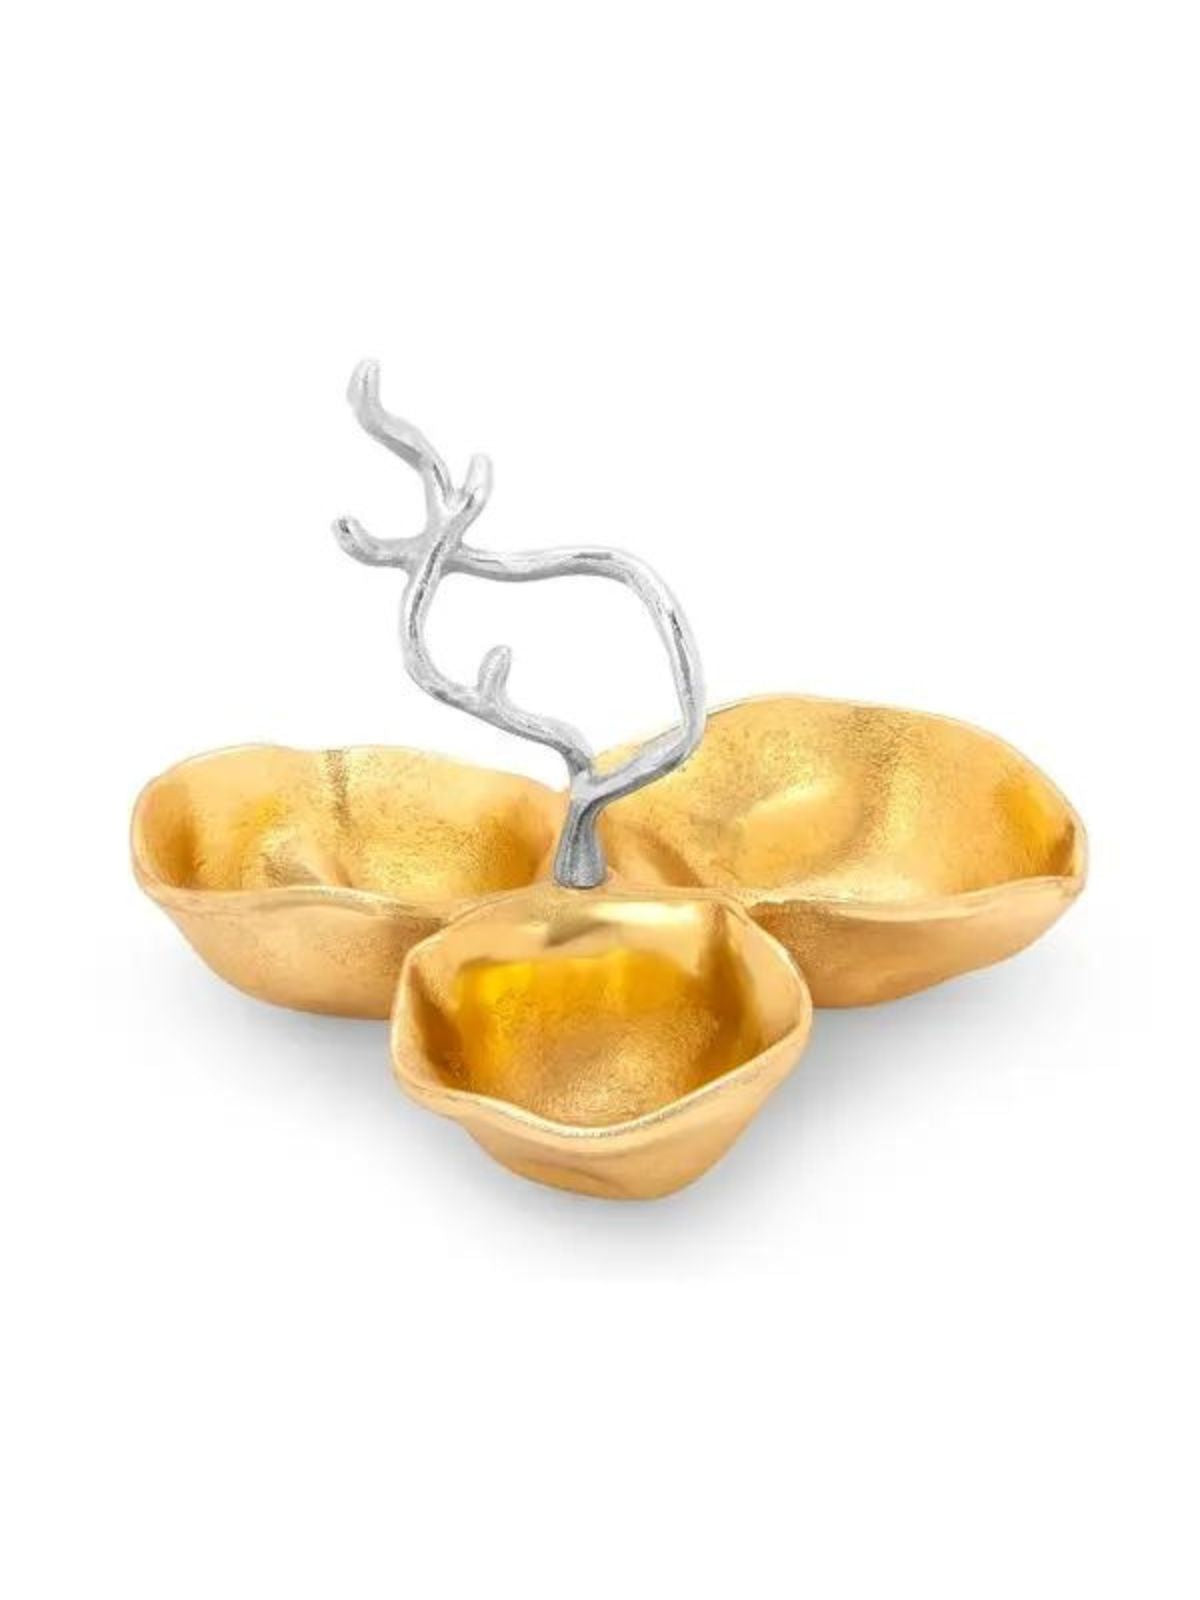 Adorn you table with this modern designed 12in serving bowl. Its gold bowl, coordinates perfectly with its silver branch design and can also be enjoyed as a centerpiece dish. Sold by KYA Home Decor